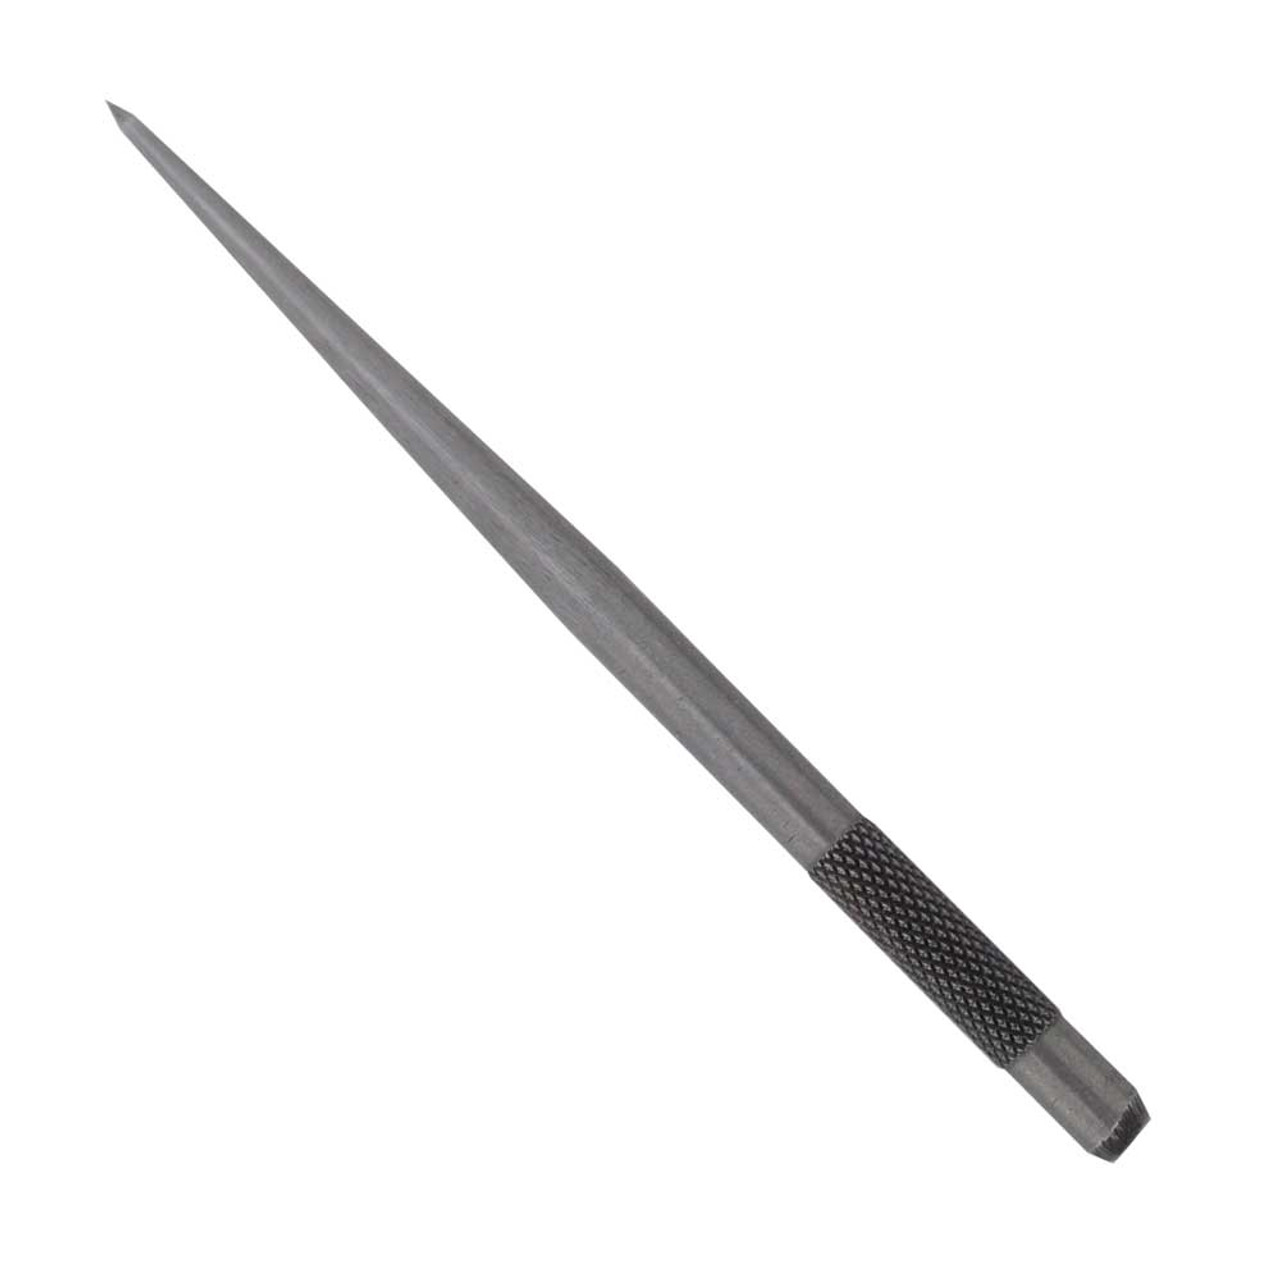 Metal Center Punch Hardened Carbon Steel Center Dia 5mm Point Octagon Shank